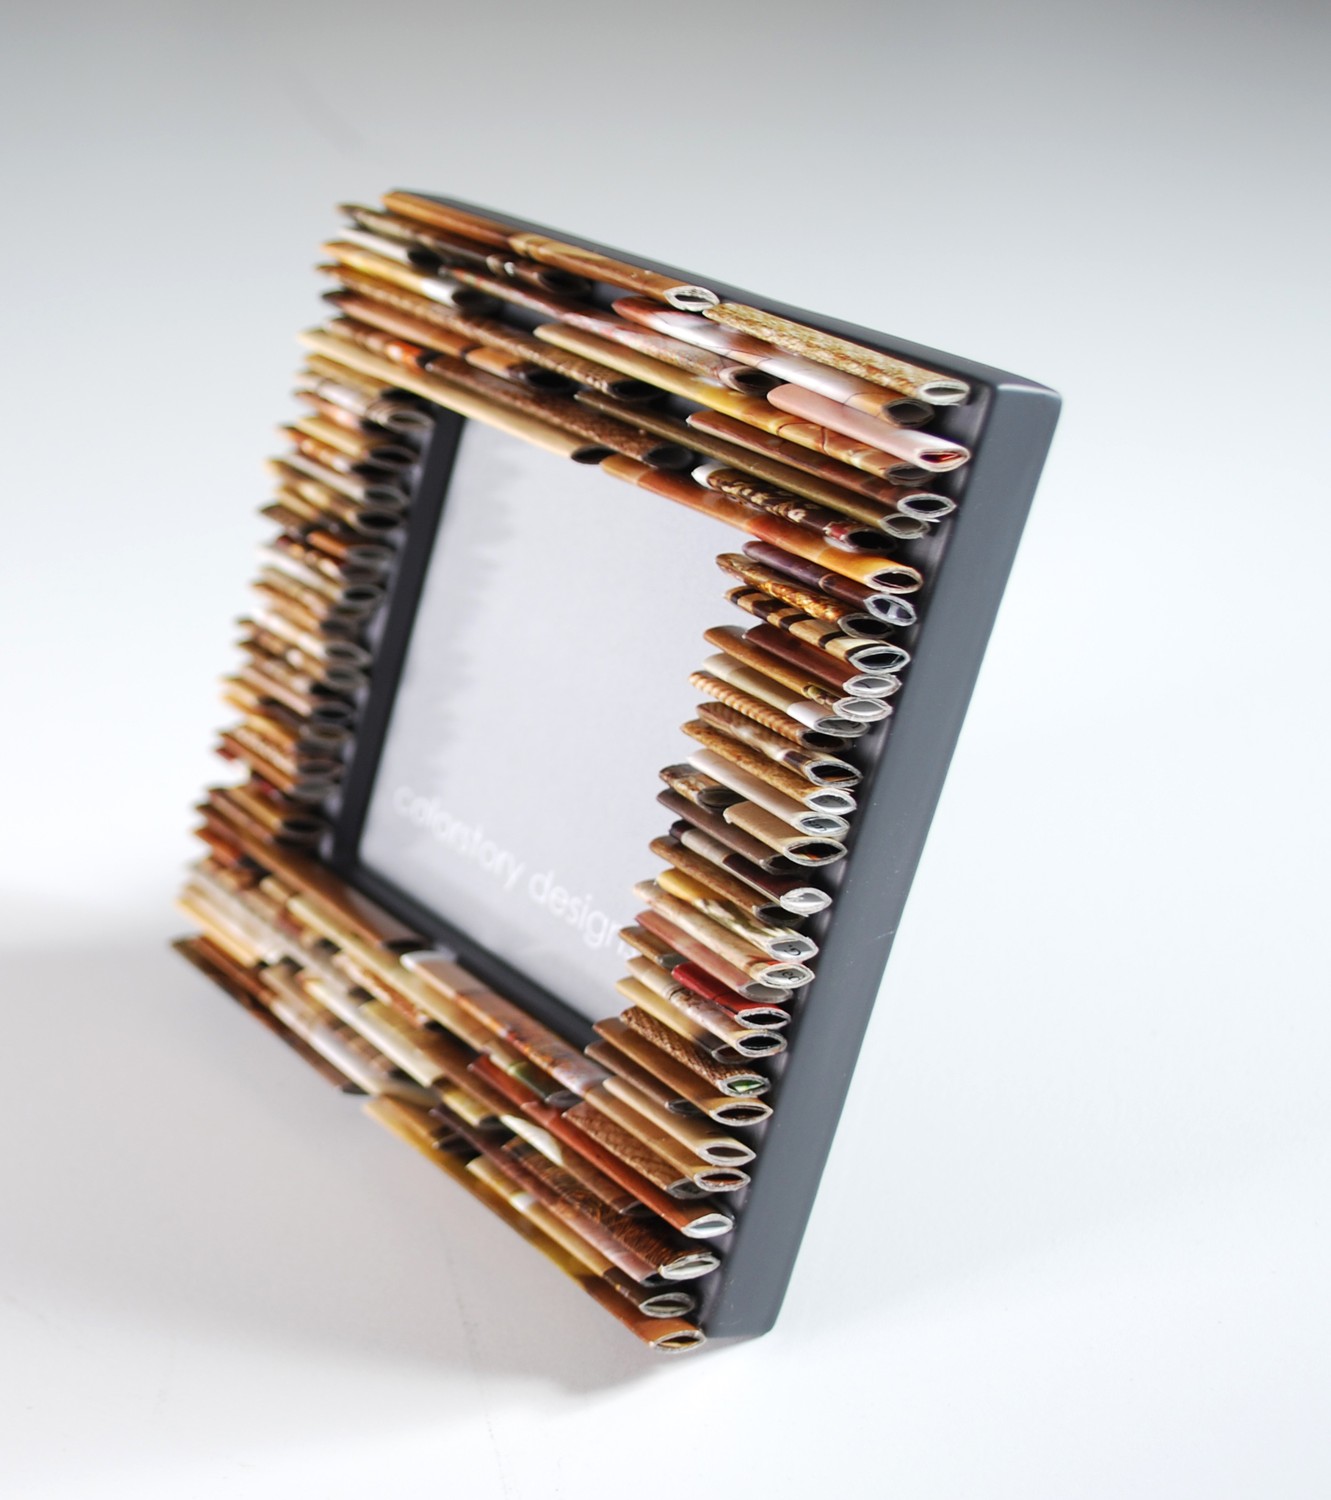 A picture frame made from #recycled magazines | Recycle Magazine and ...